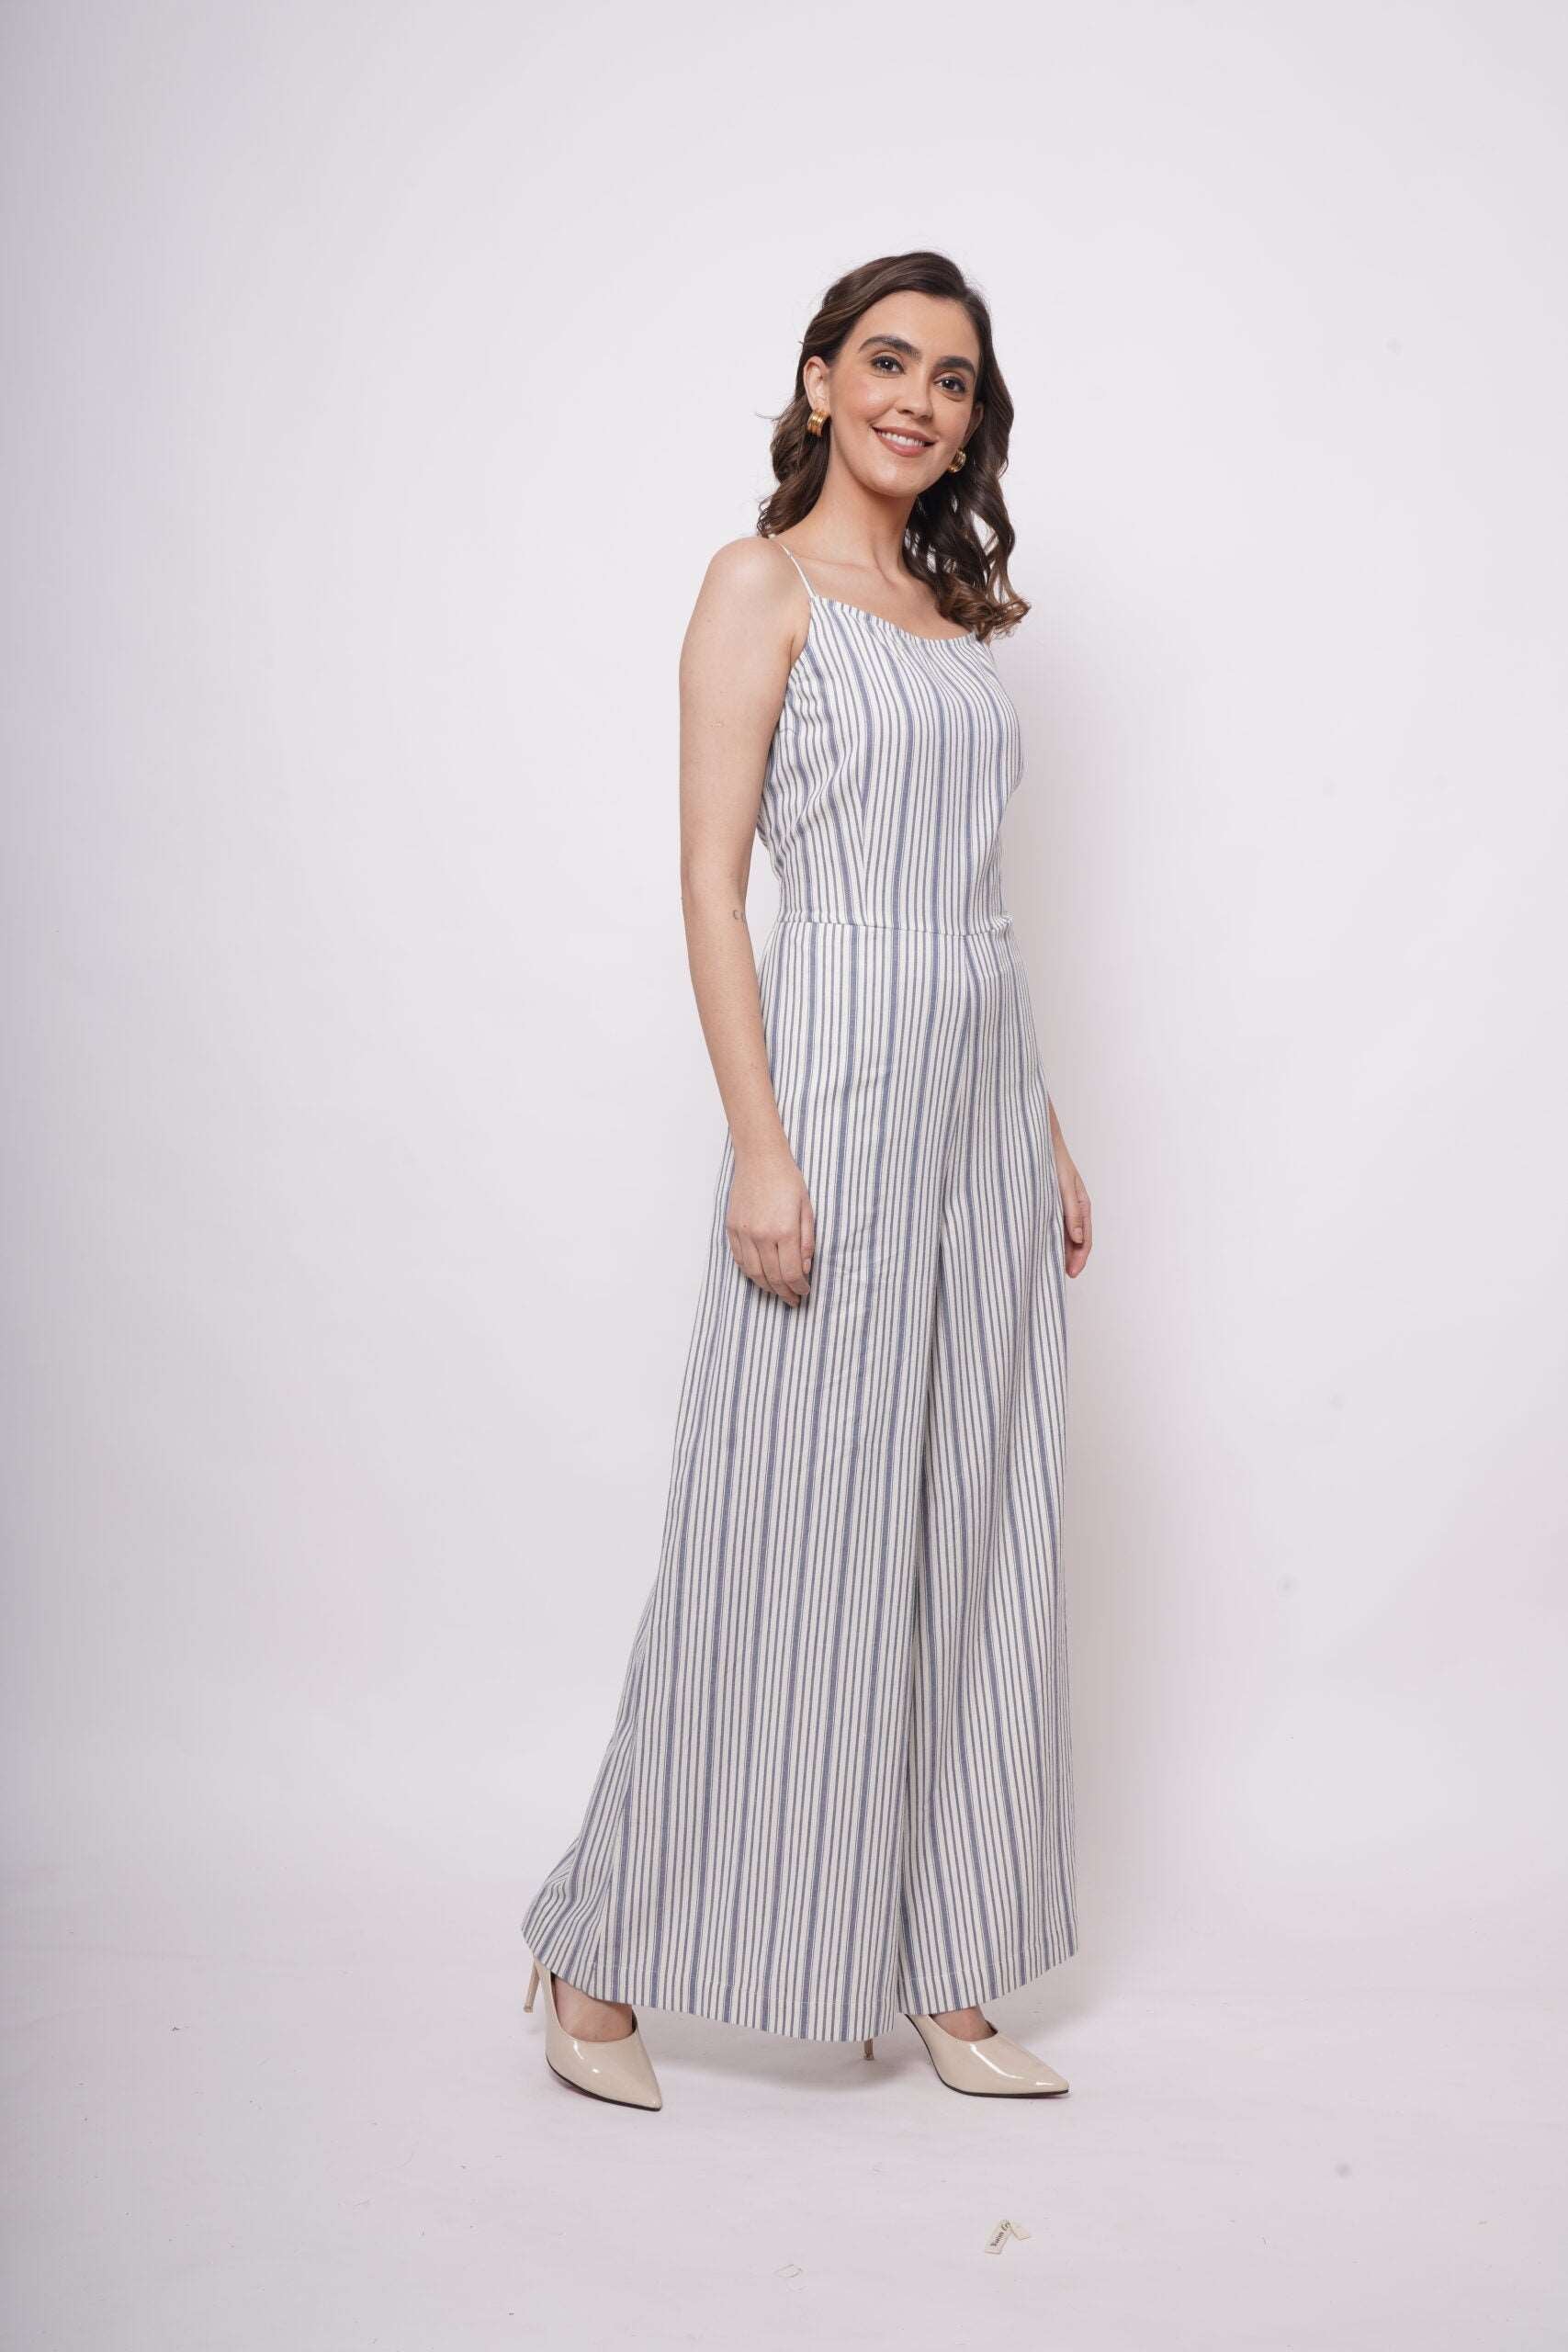 White and Blue Stripe Sleeveless Strappy Jumpsuit - Western Era  Jumpsuits